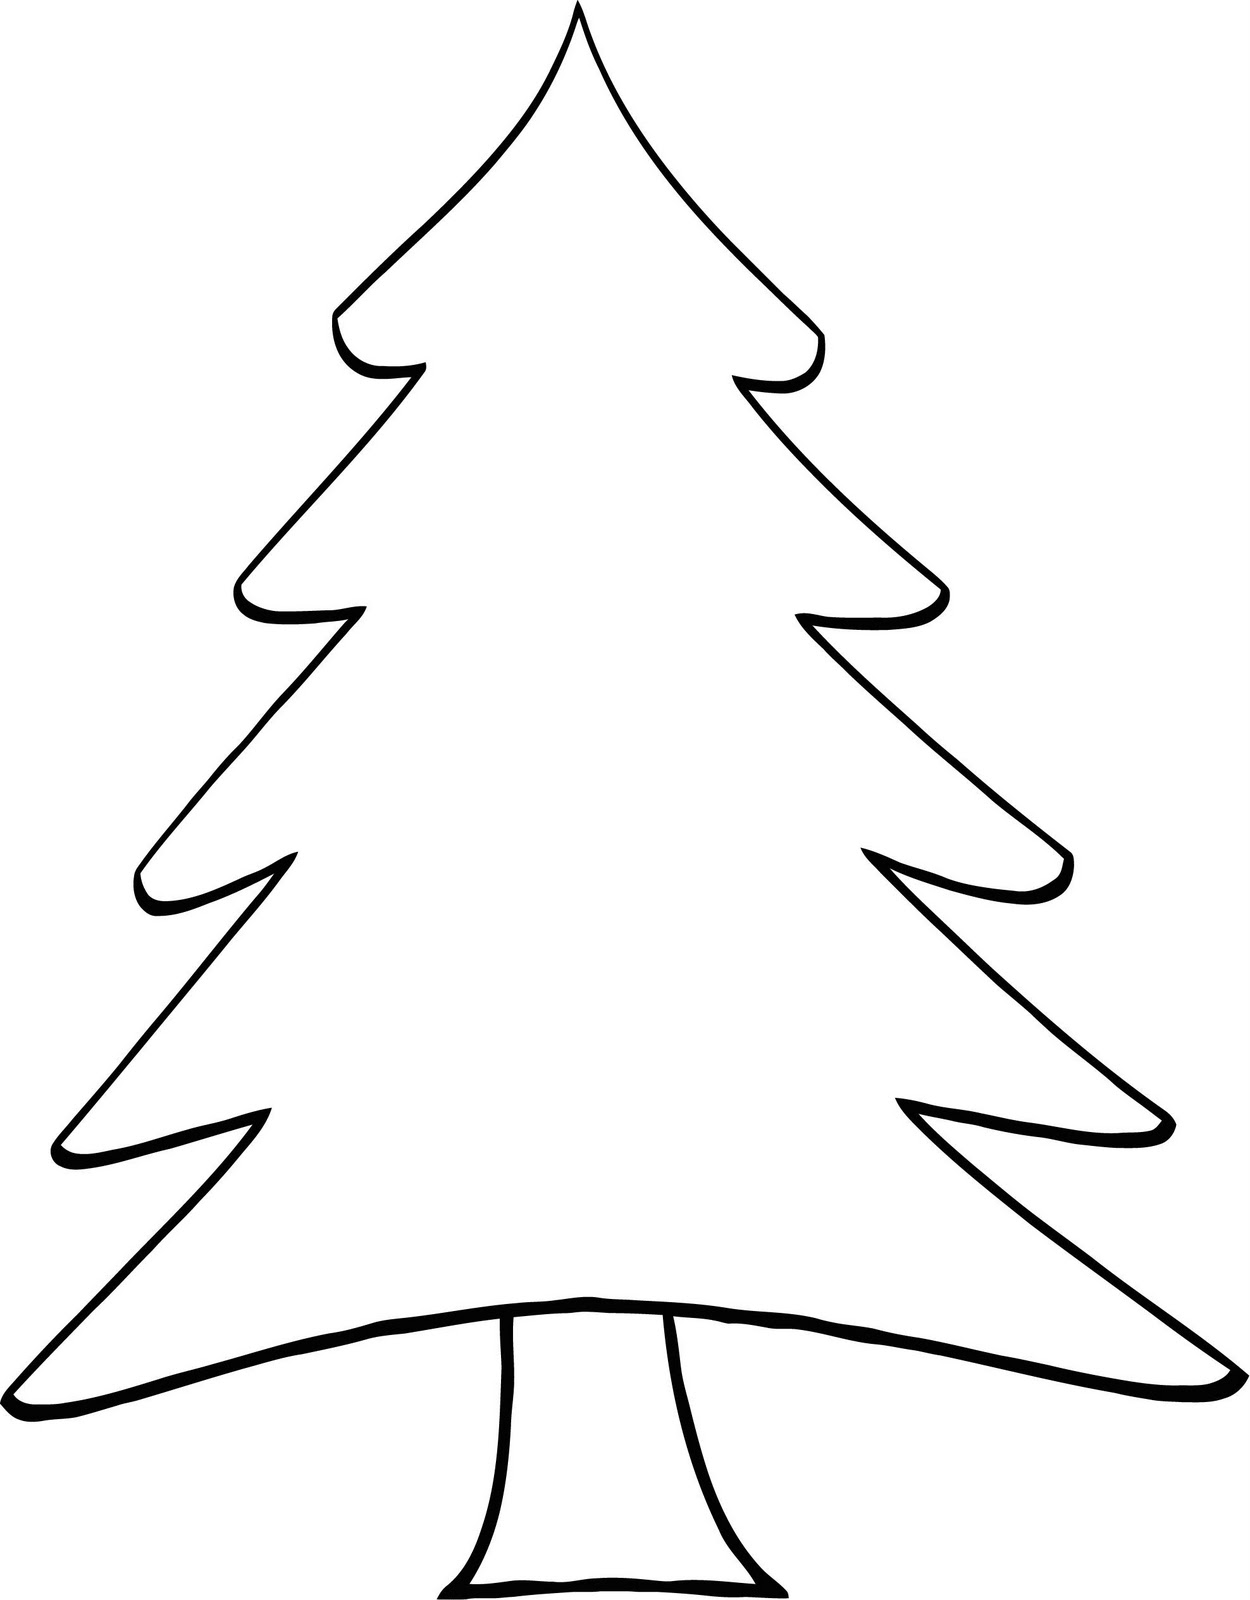 white pine tree colouring pages id 63354 : Uncategorized - yoand.